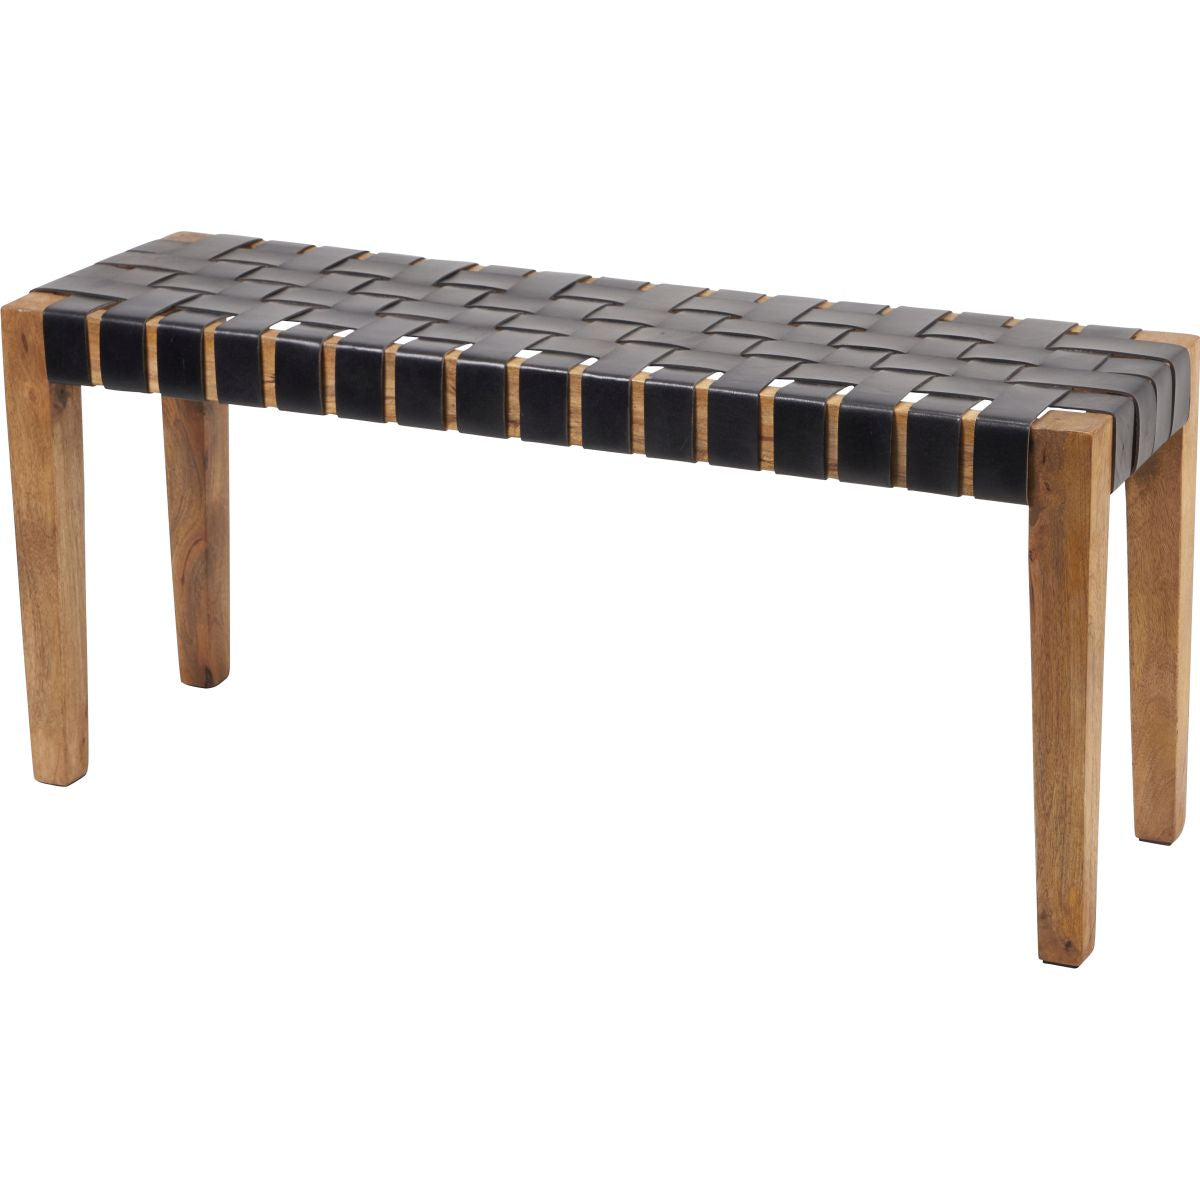 S/3 Claudio Black Woven Leather and Wood Bench and Stools